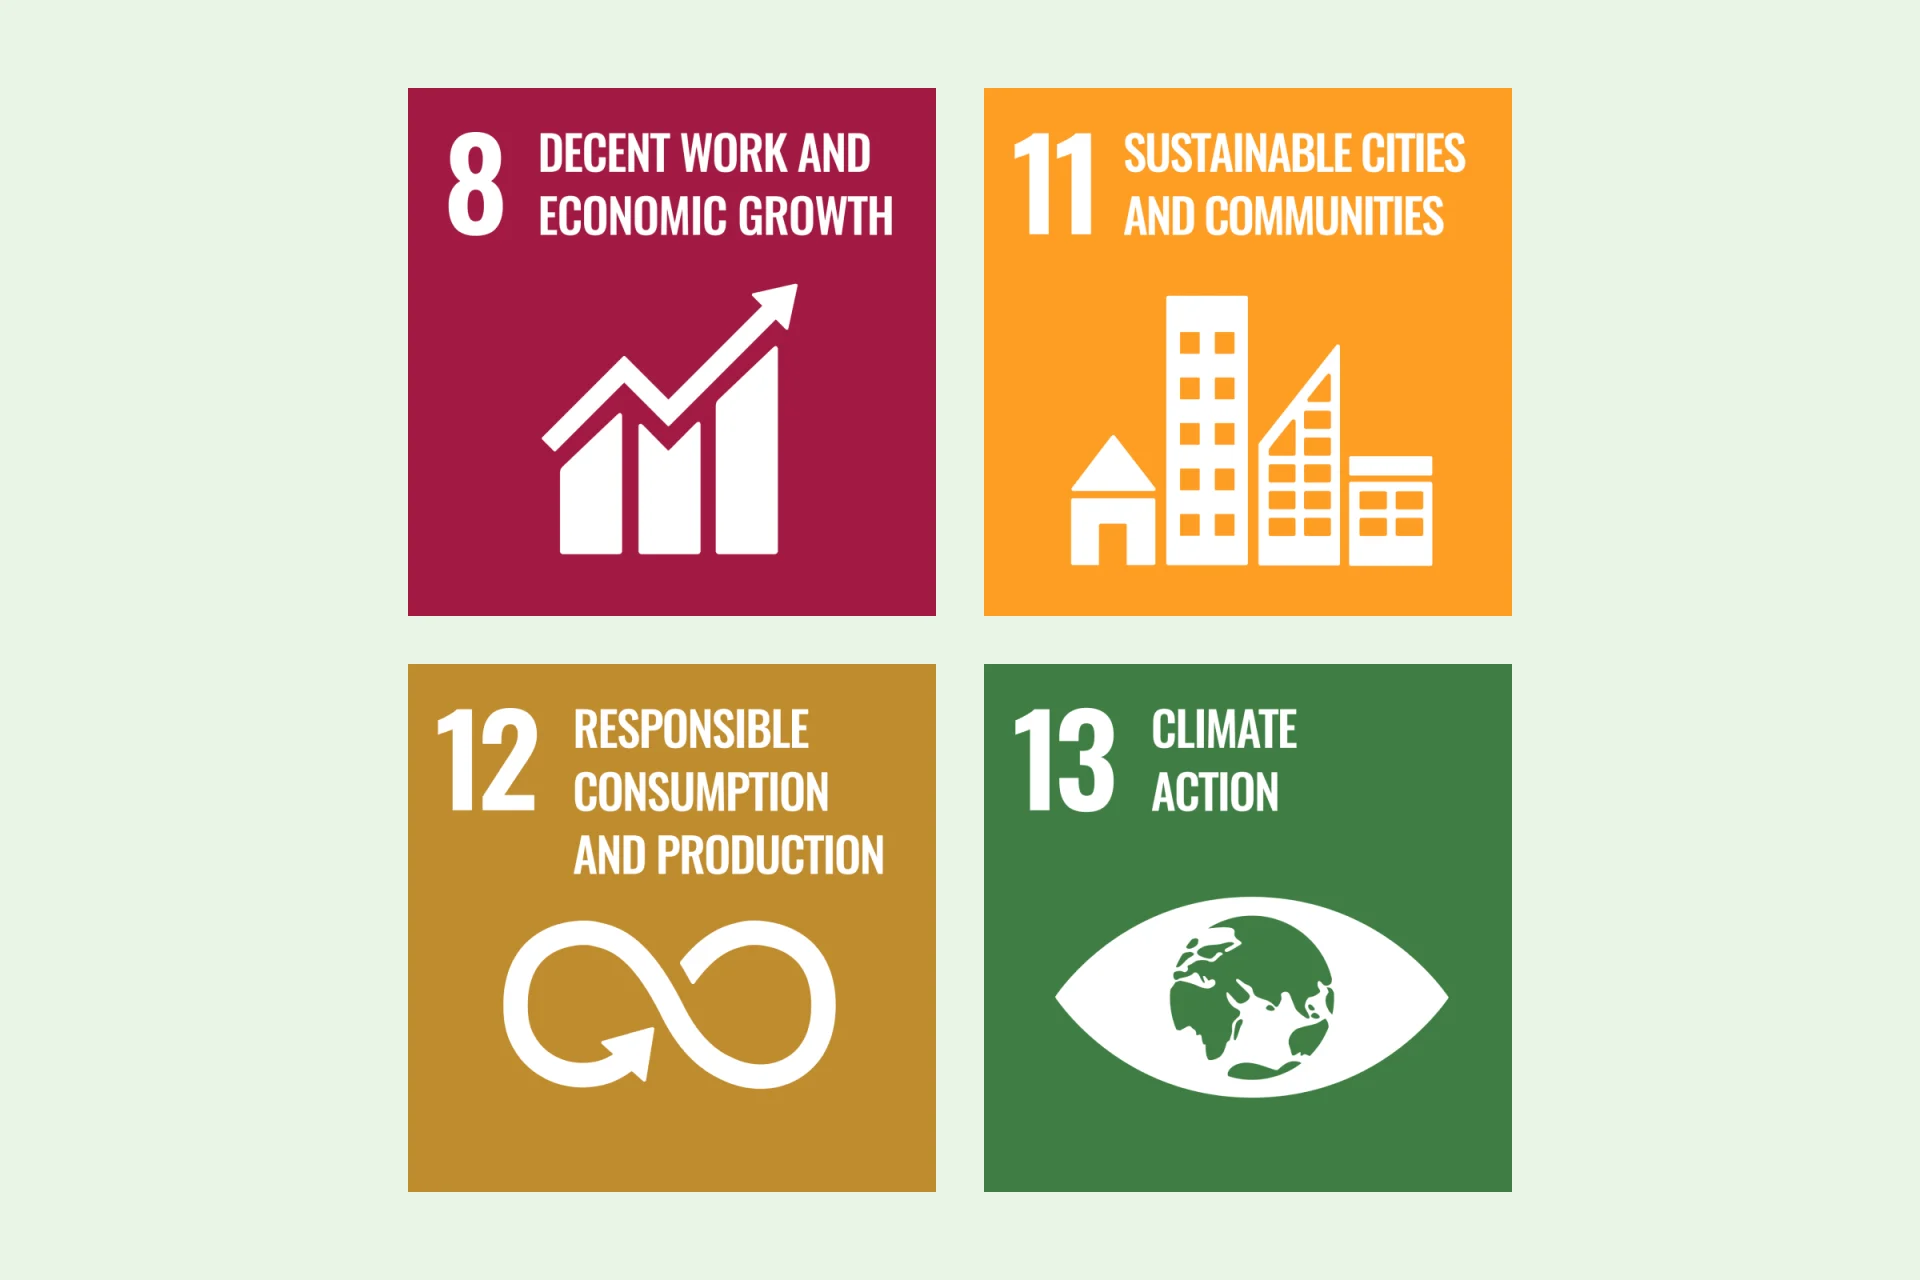 Our circularity & recycling targets follow the SDGs 8, 11, 12 and 13.